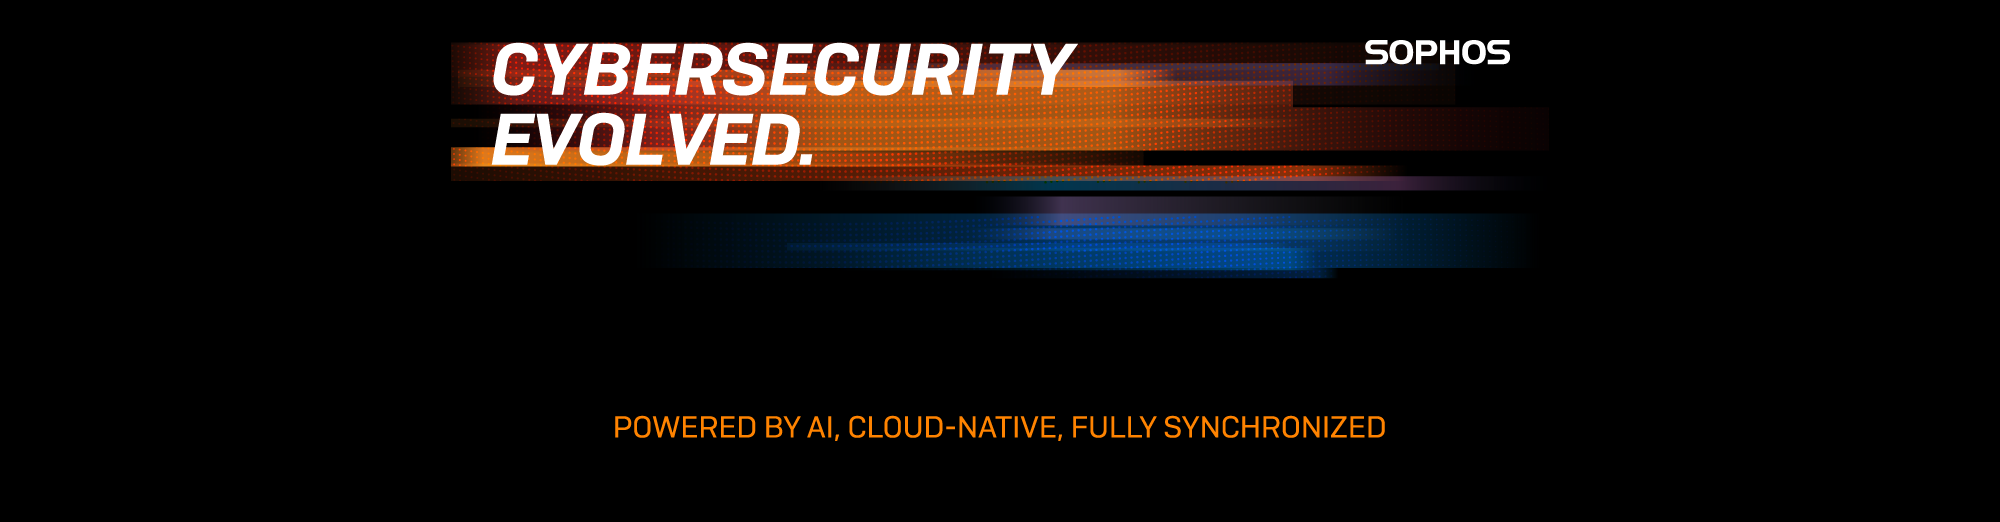 sopohs-cybersecurity-evovled-iworldconnect-web-banner-1100x522px-2